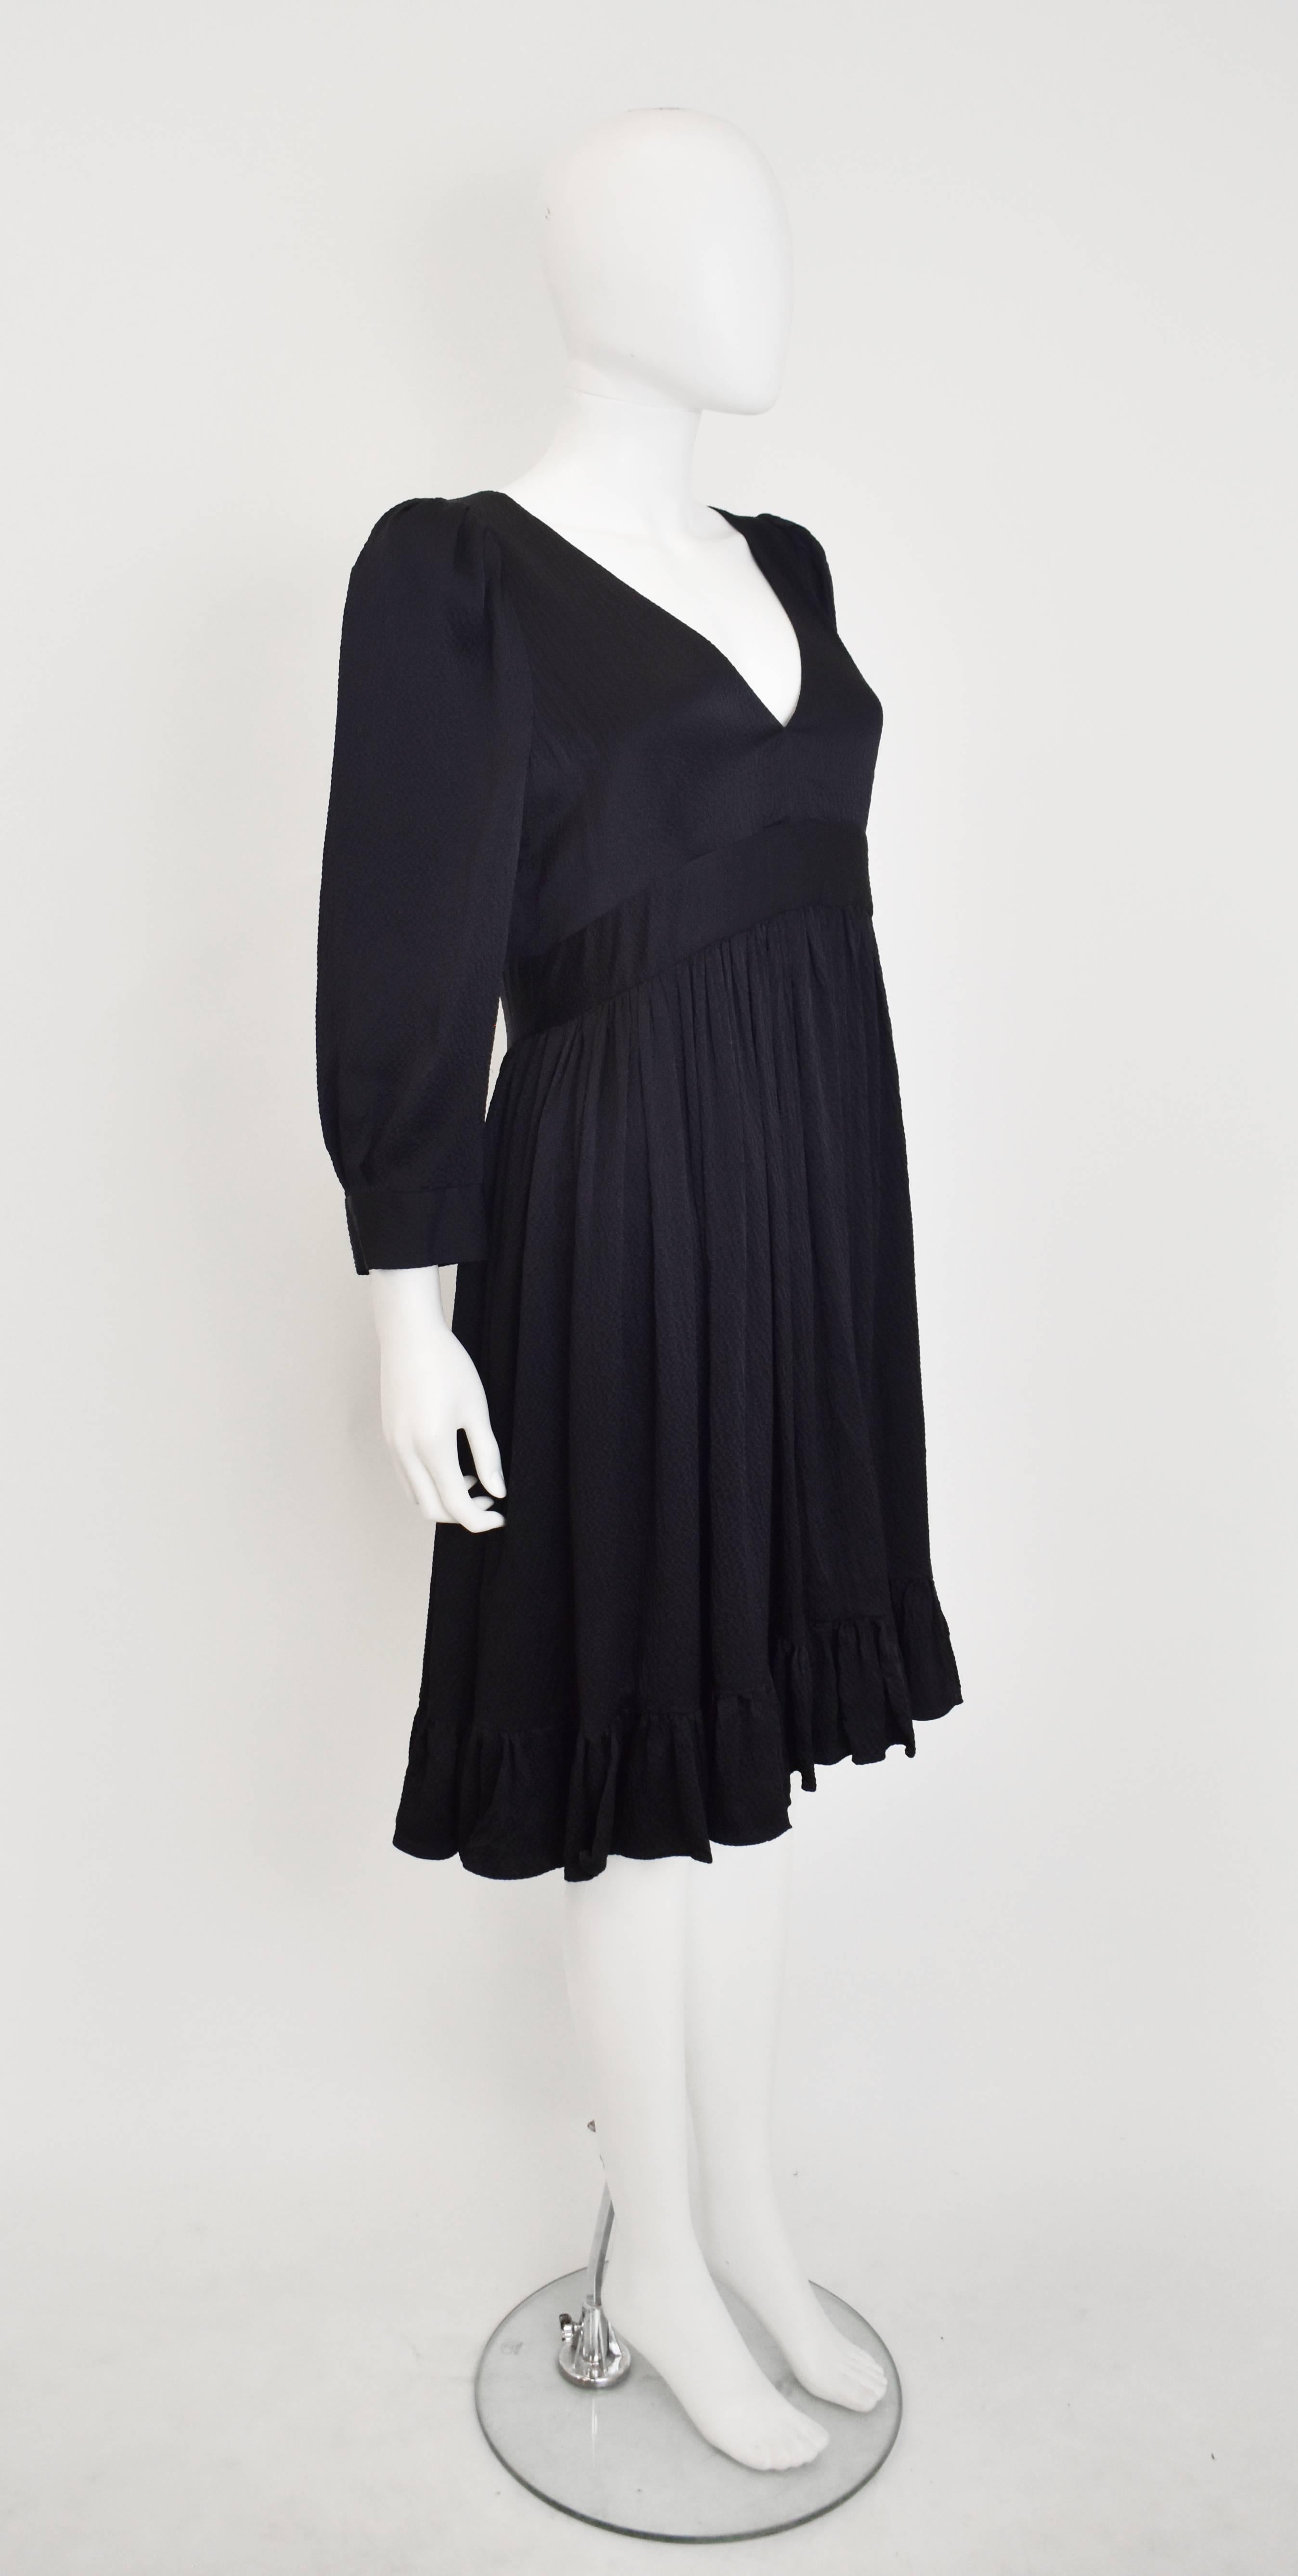 An elegant dress from Balenciaga’s Silk collection. The dress has a classic shape with a V-neck, fitted waist, bell sleeves with a cuff and a ruffled hem. The dress is made from a textured black silk and falls to just above the knee. It is an